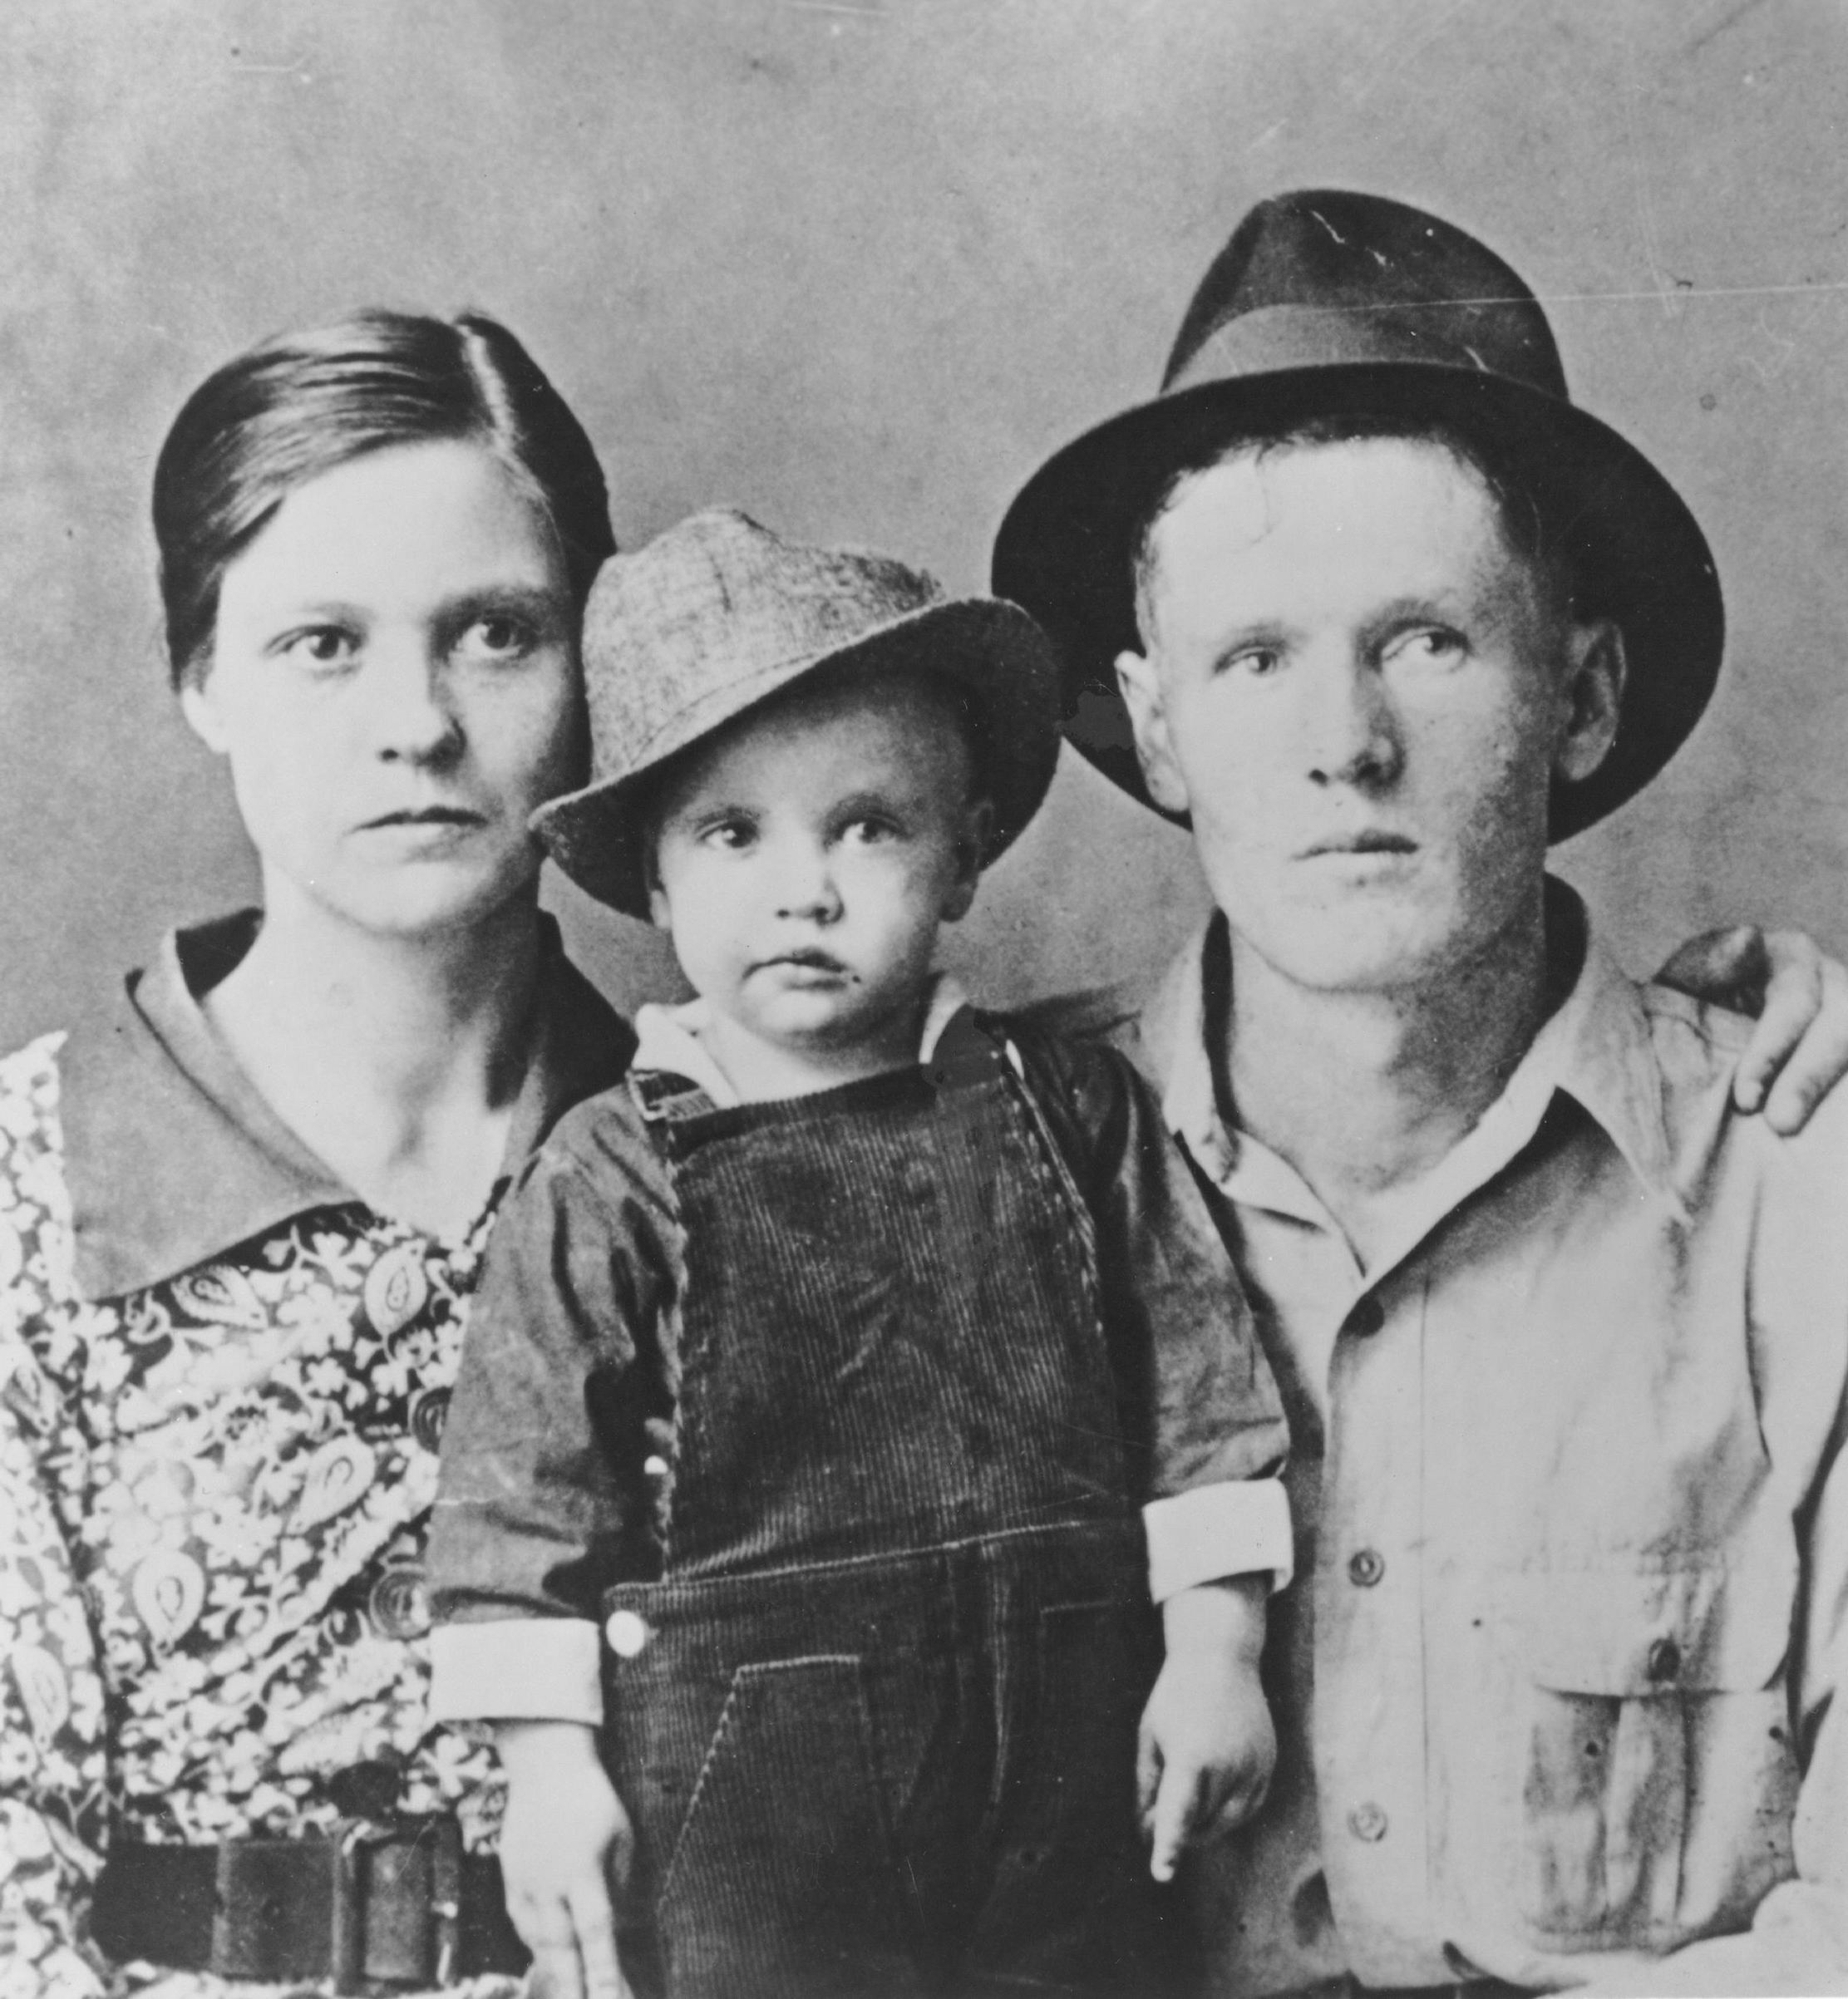 Elvis Presley poses for a family portrait with his parents Vernon Presley and Gladys Presley in 1937 in Tupelo, Mississippi.